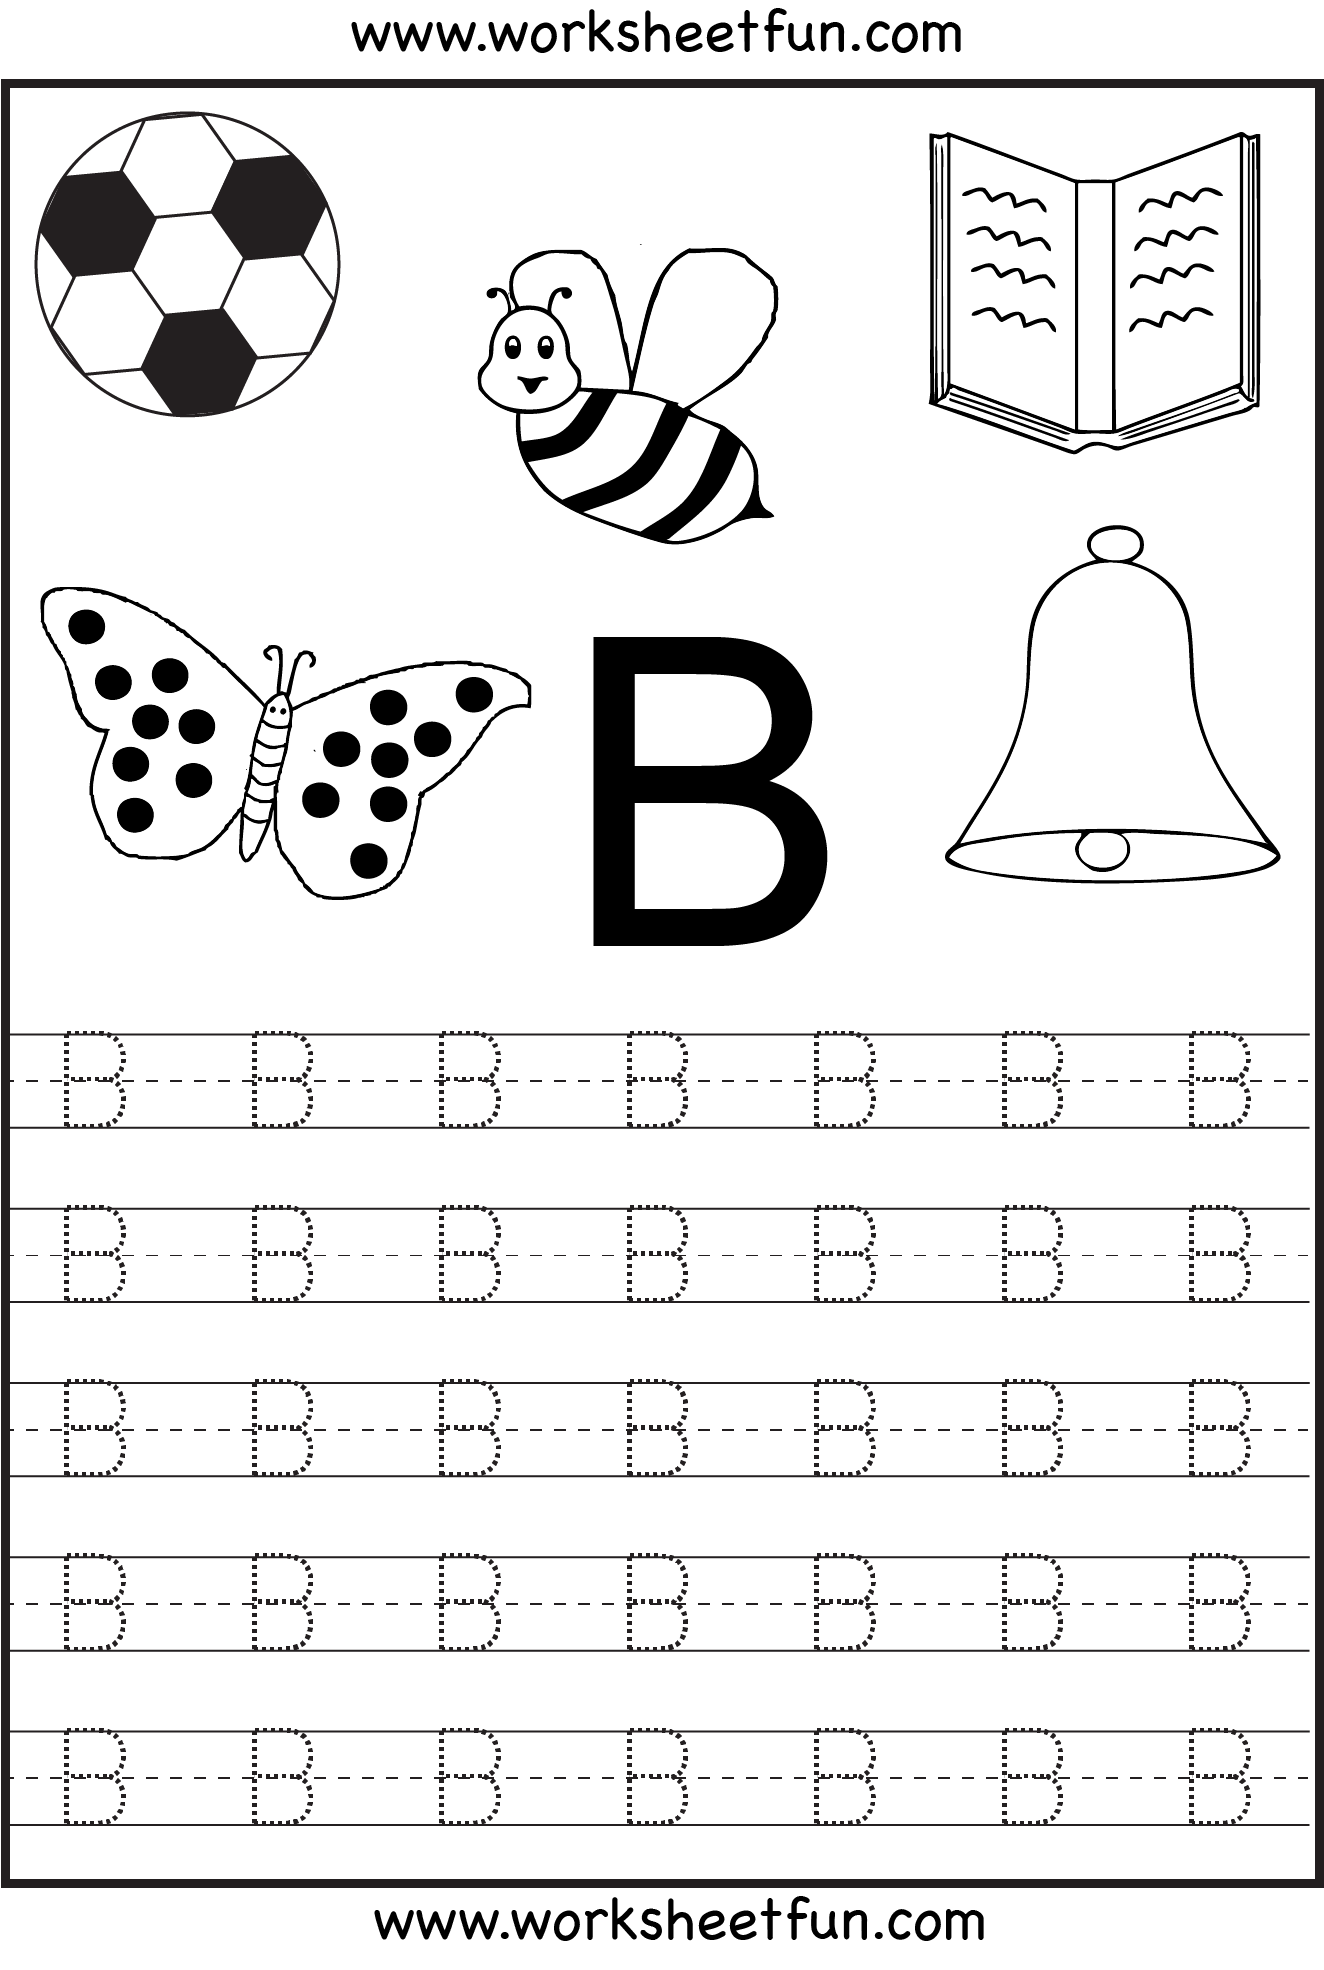 18 Letter B Worksheets for Practicing | KittyBabyLove.com